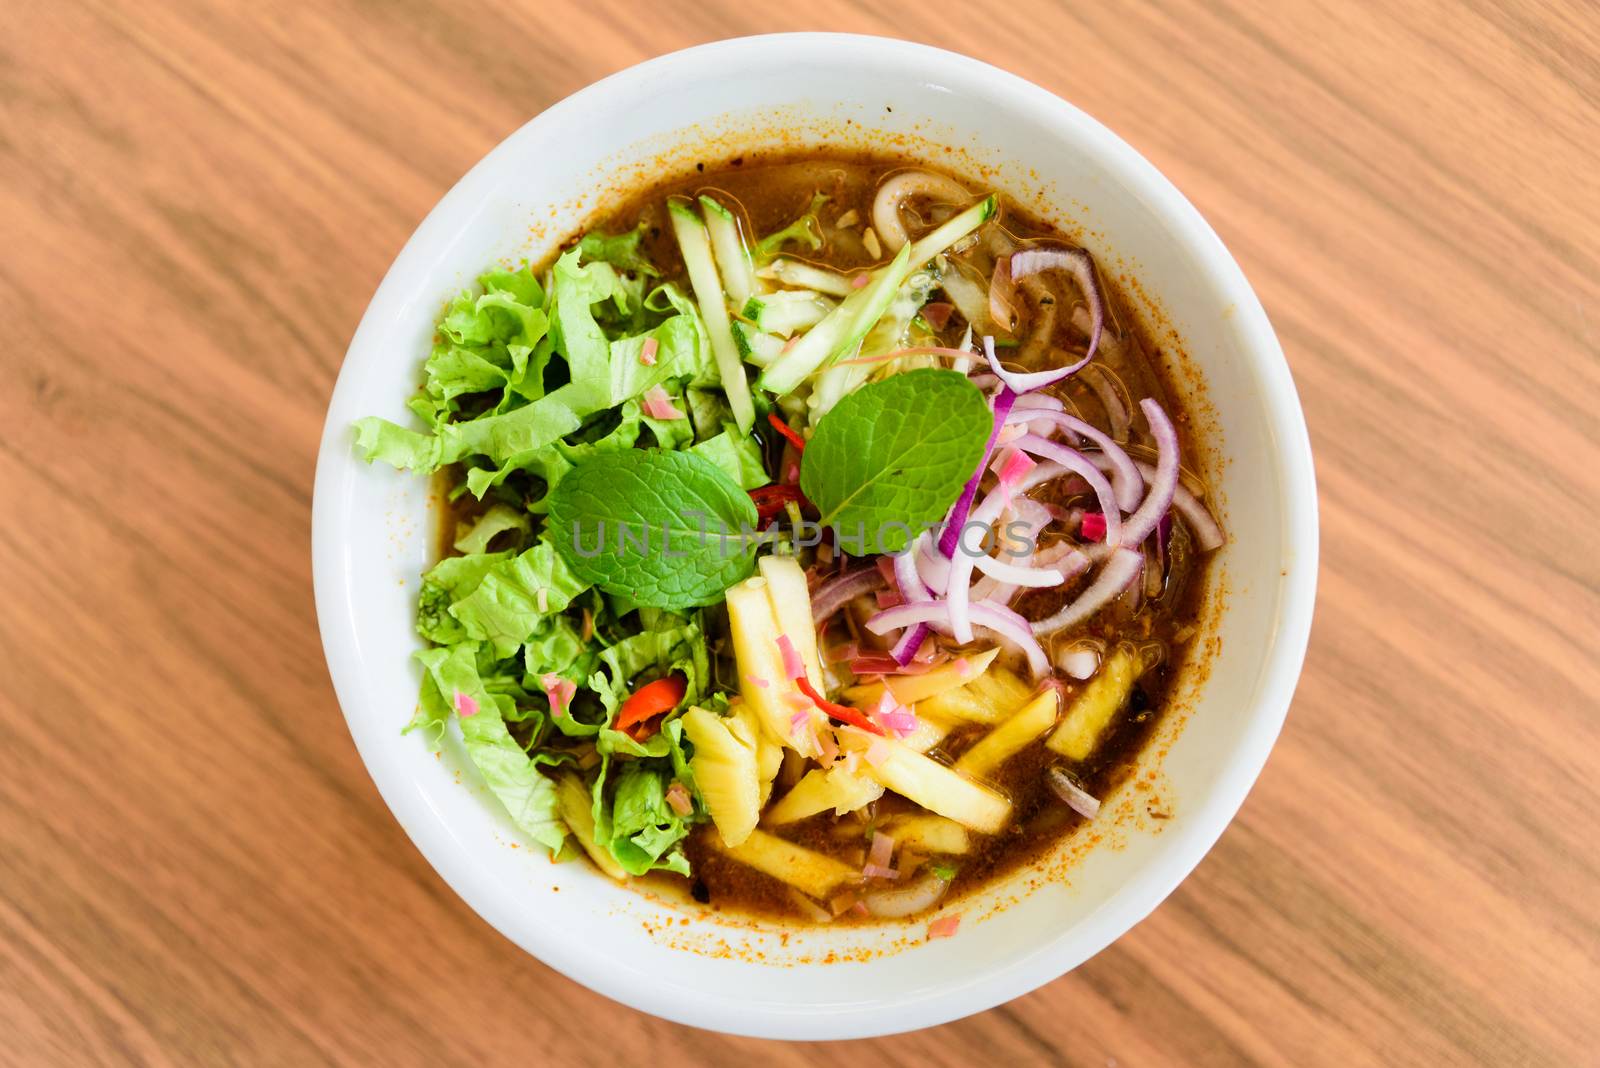 Laksa on wooden table. Laksa is a spicy noodle soup popular in the Peranakan cuisine.